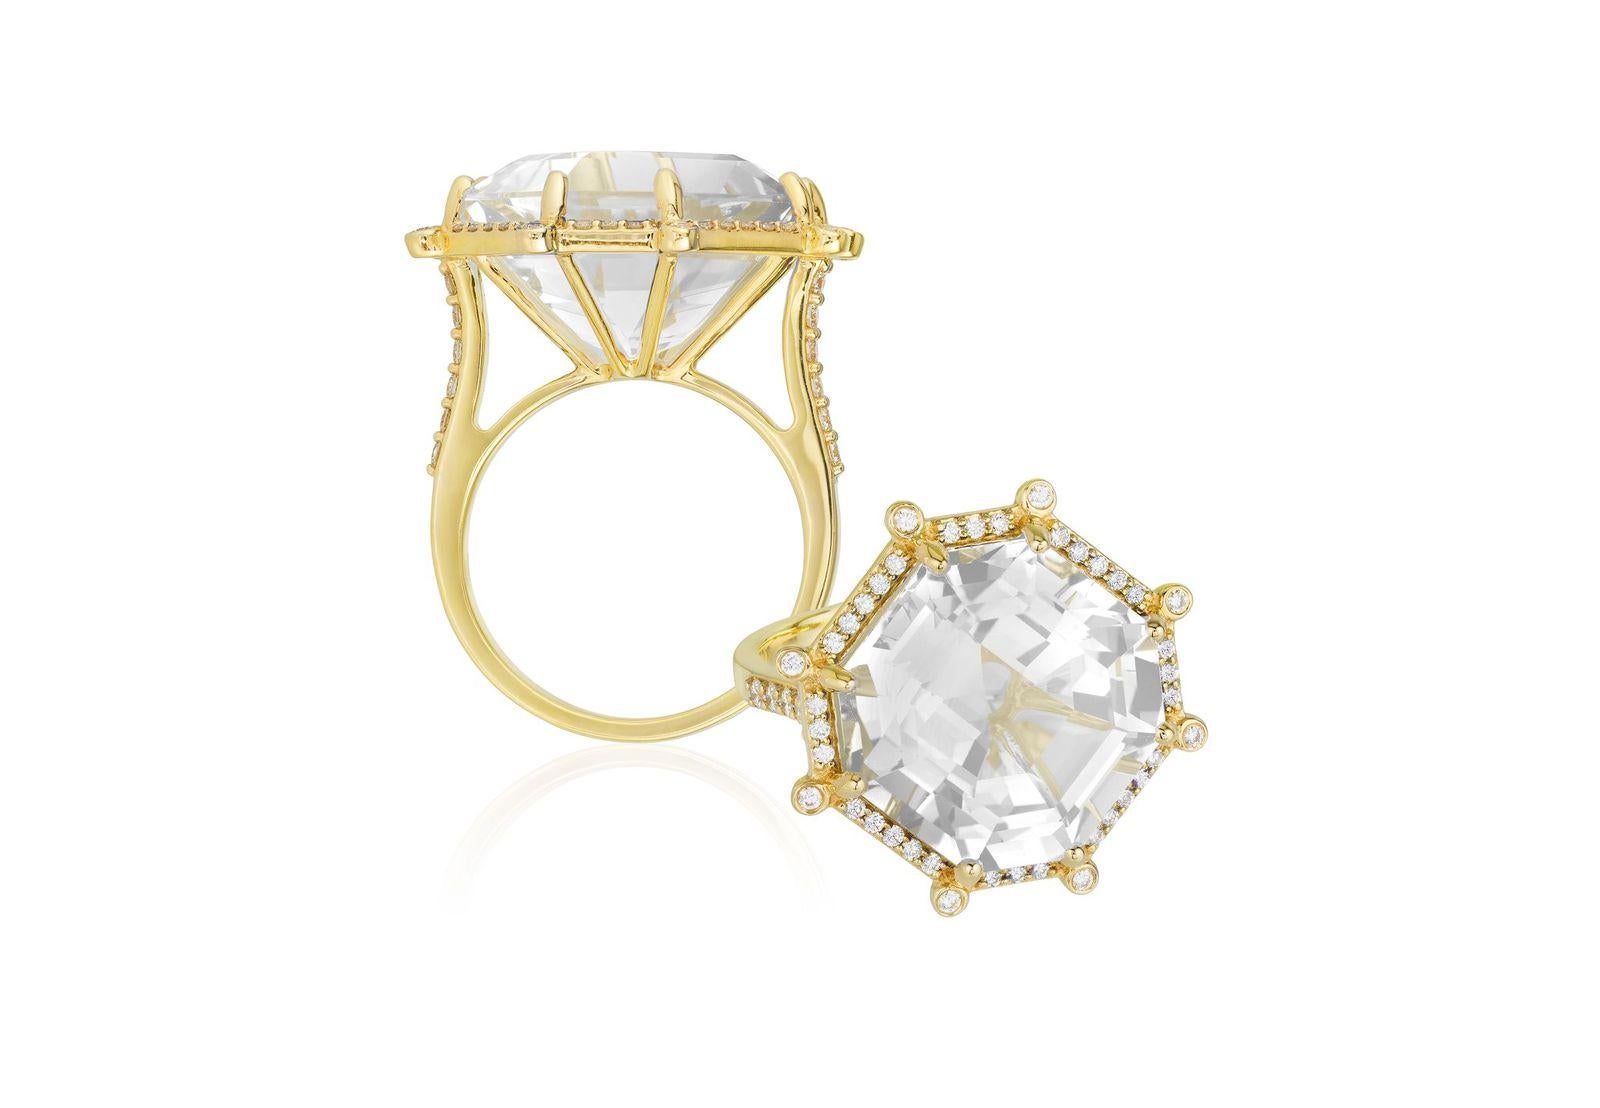 Large Moon Quartz Octagon Ring with Diamonds in 18K Yellow Gold, from 'Gossp' Collection

Stone Size: 16 x 16 mm

Gemstone Approx Wt: Moon Quartz- 14.45 Carats

Diamonds: G-H / VS, Approx Wt: 0.47 Carats